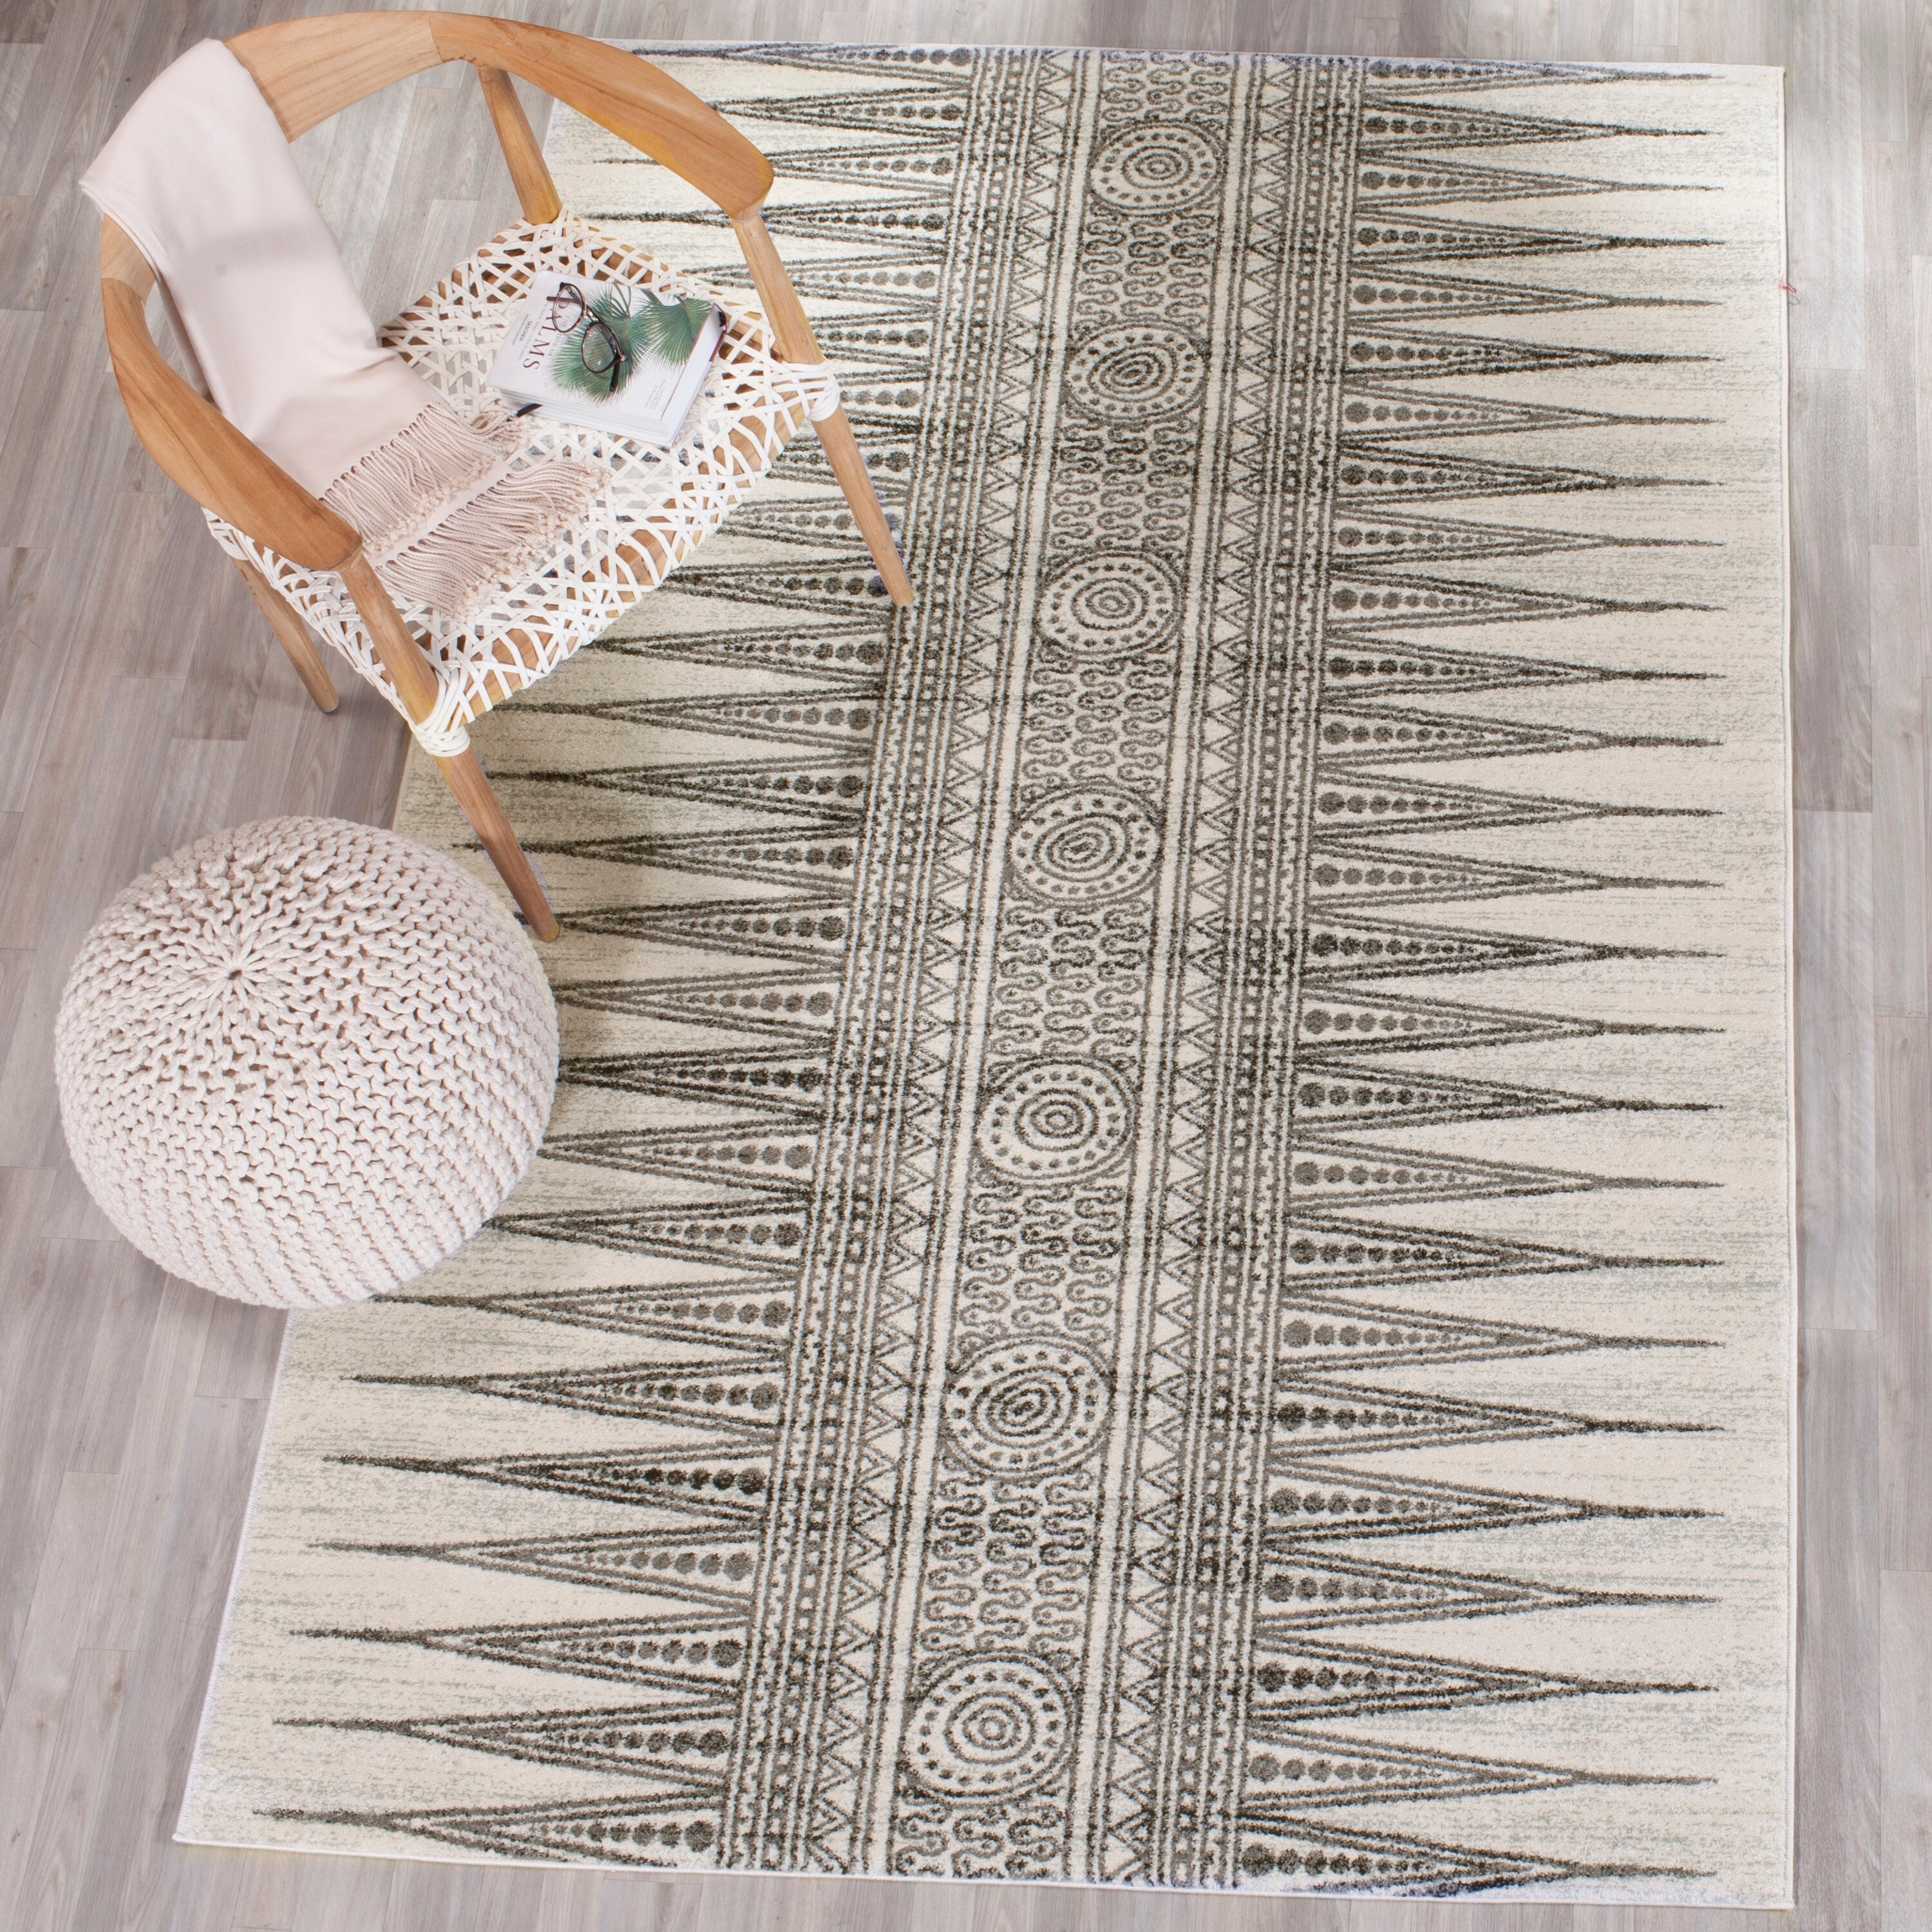 Safavieh Evoke Layla 4 X 6 Ivory Gray Indoor Fl Botanical Southwestern Area Rug In The Rugs Department At Lowes Com